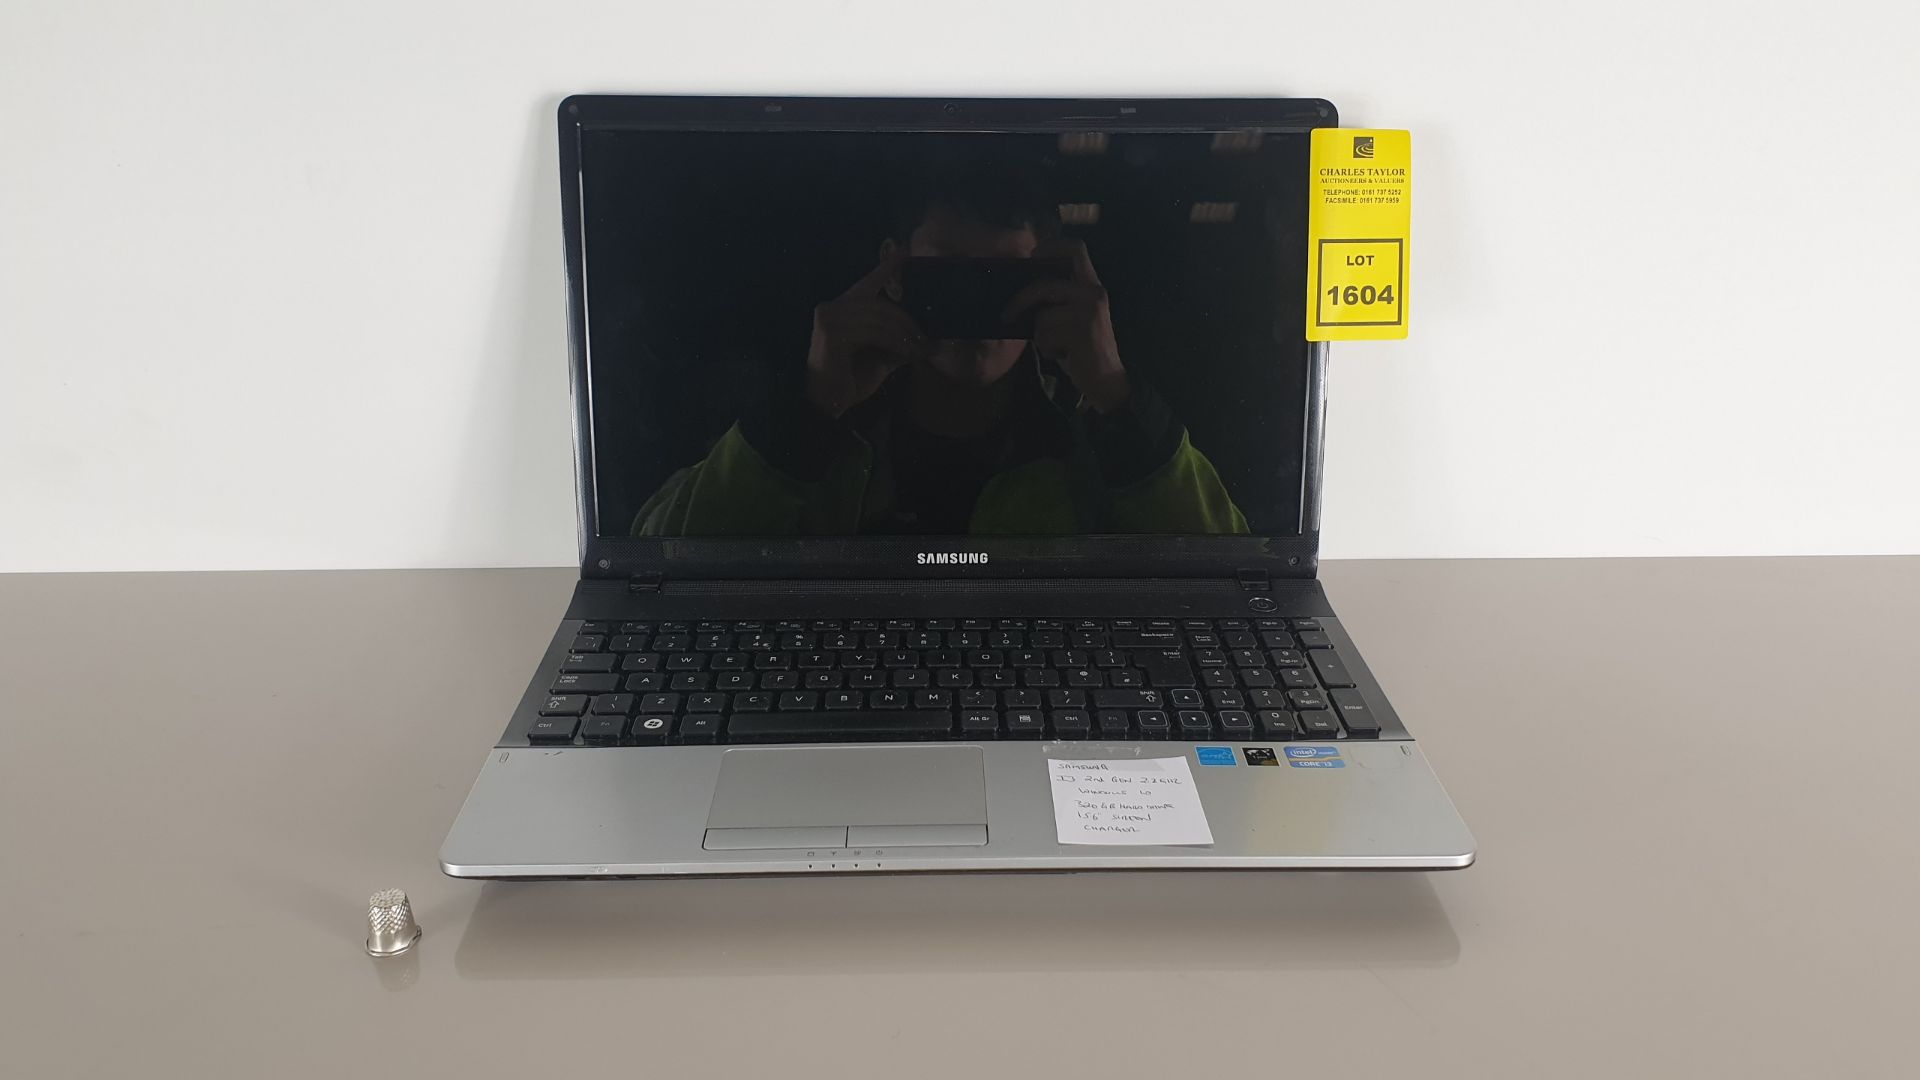 (LOT FOR THURSDAY 28TH MAY AUCTION) SAMSUNG I3 LAPTOP - 2ND GEN 2.2 GHZ - 320GB MEMORY, 15.6" SCREEN